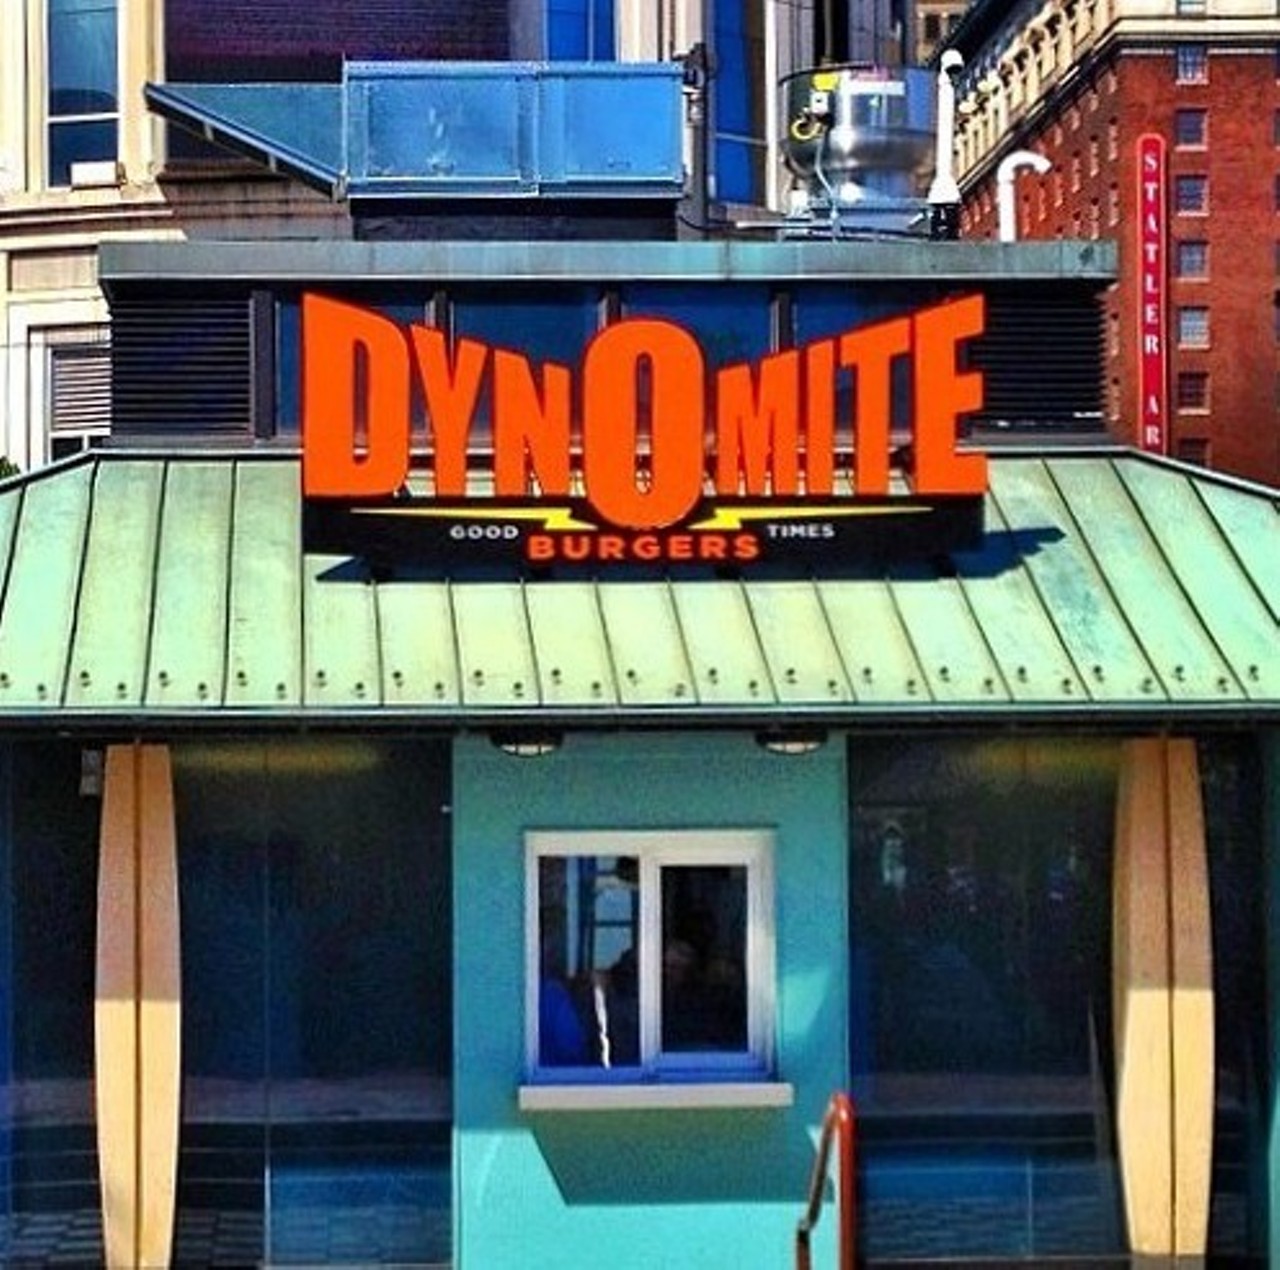  Dynomite Burgers
1302 Euclid Ave., Cleveland
Local star chef Zack Bruell had such good burgers at all of his restaurants that he decided to put them all in one place. In a large hut right by Playhouse Square, you can try the Chinato, L&#146;Albatros, Parallax and Cowell and Hubbard burgers, in addition to the Big Zack Burger and the house Dynomite.
Photo via Scene Archives